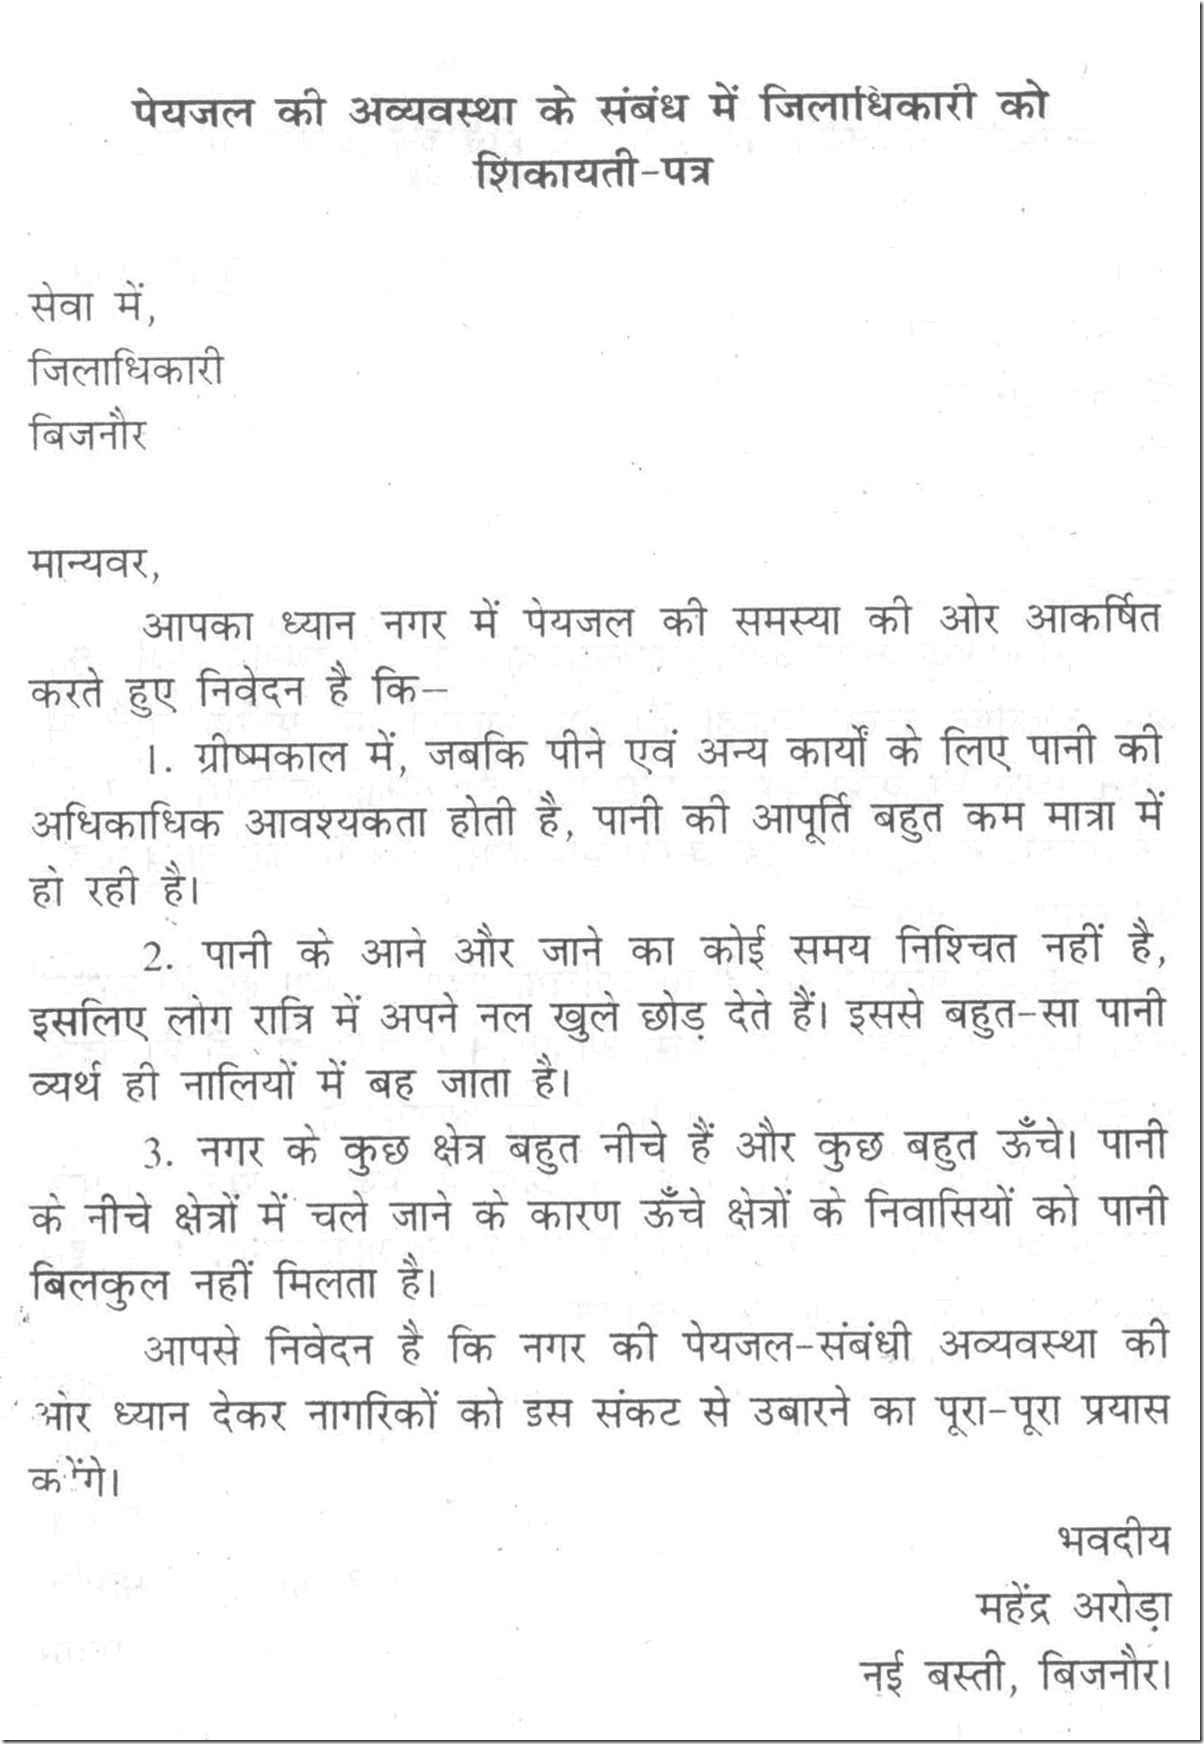 Letter To The Collector About Mismanagement Of Drinking Water Supply